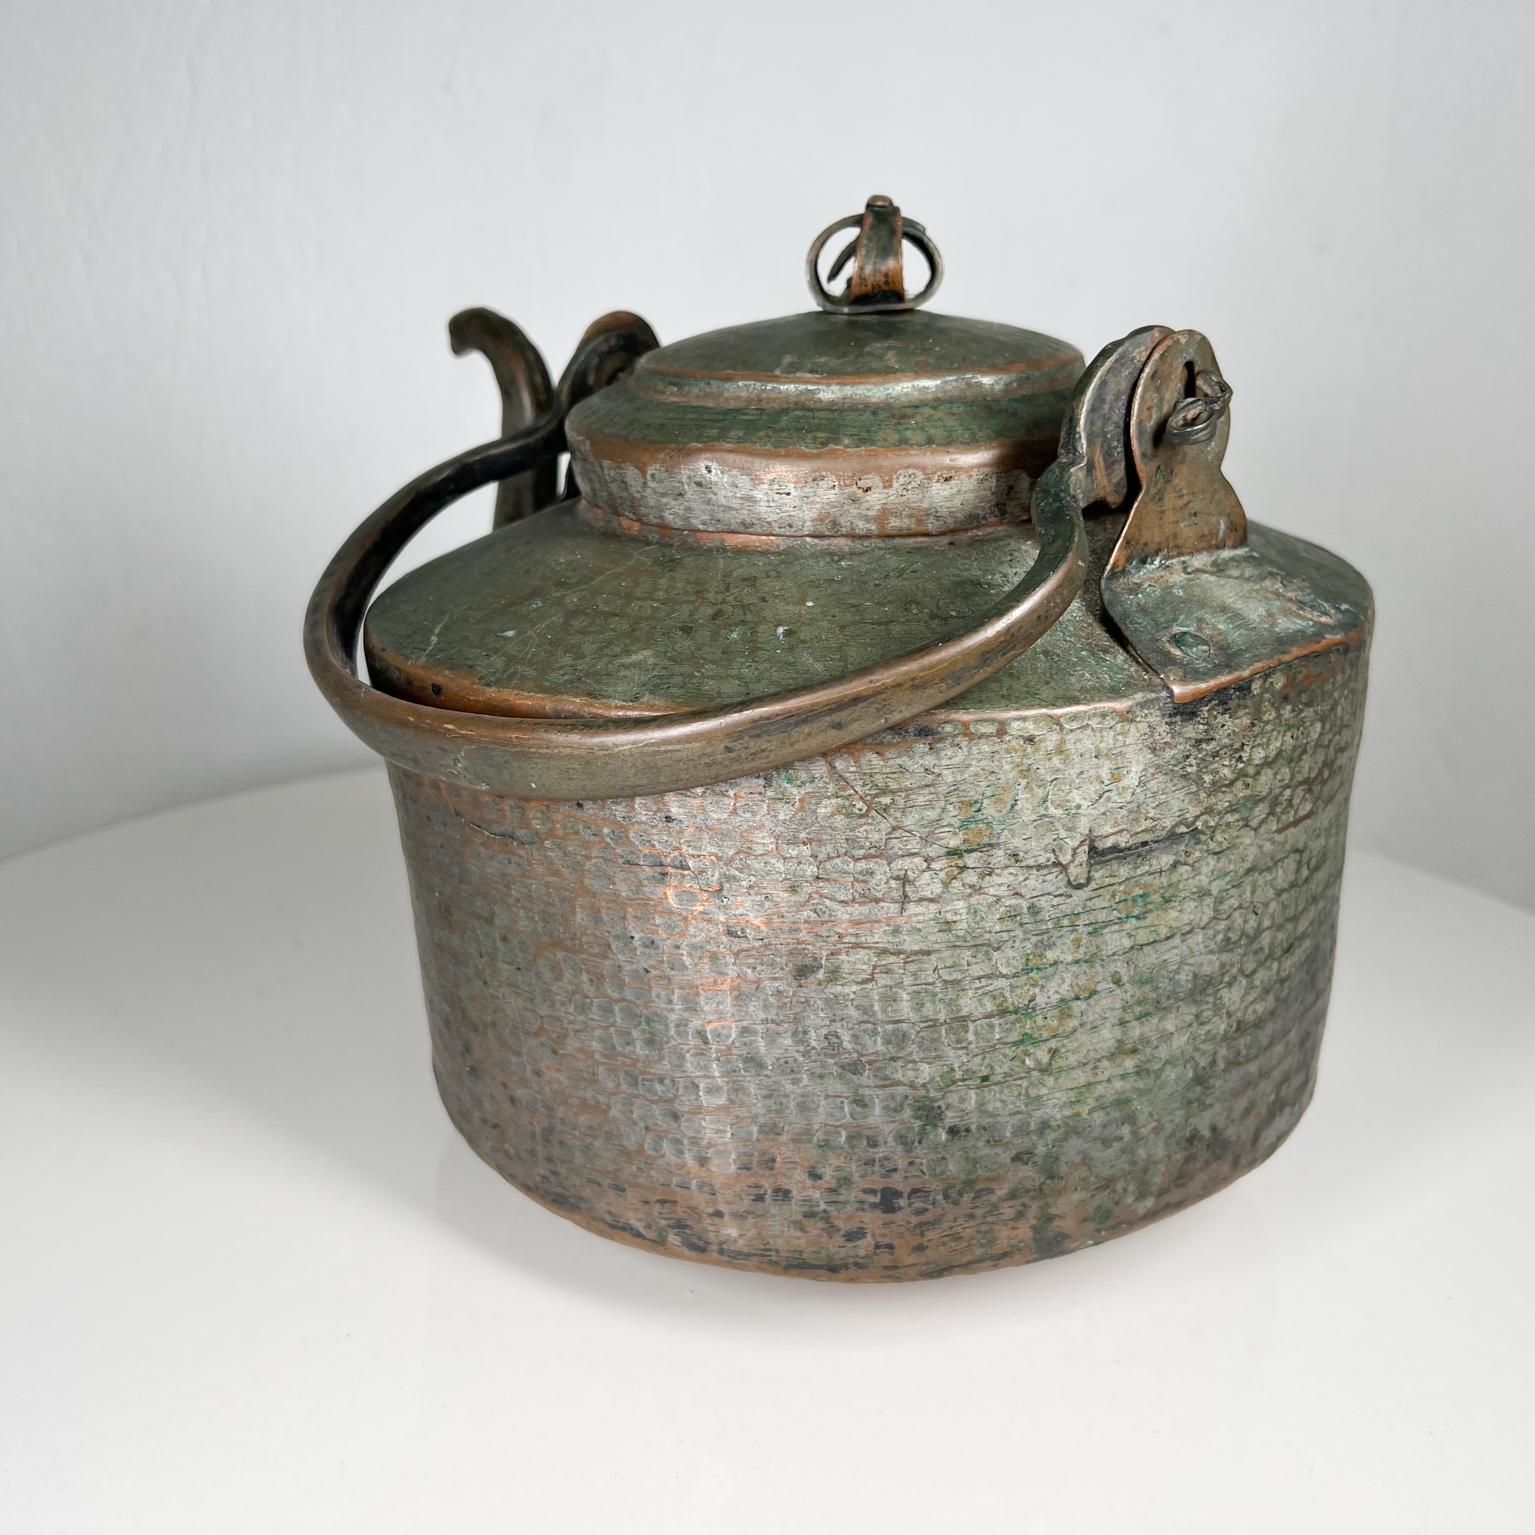 Antique Rustic Hammered Copper Tea Kettle with Flair In Good Condition For Sale In Chula Vista, CA